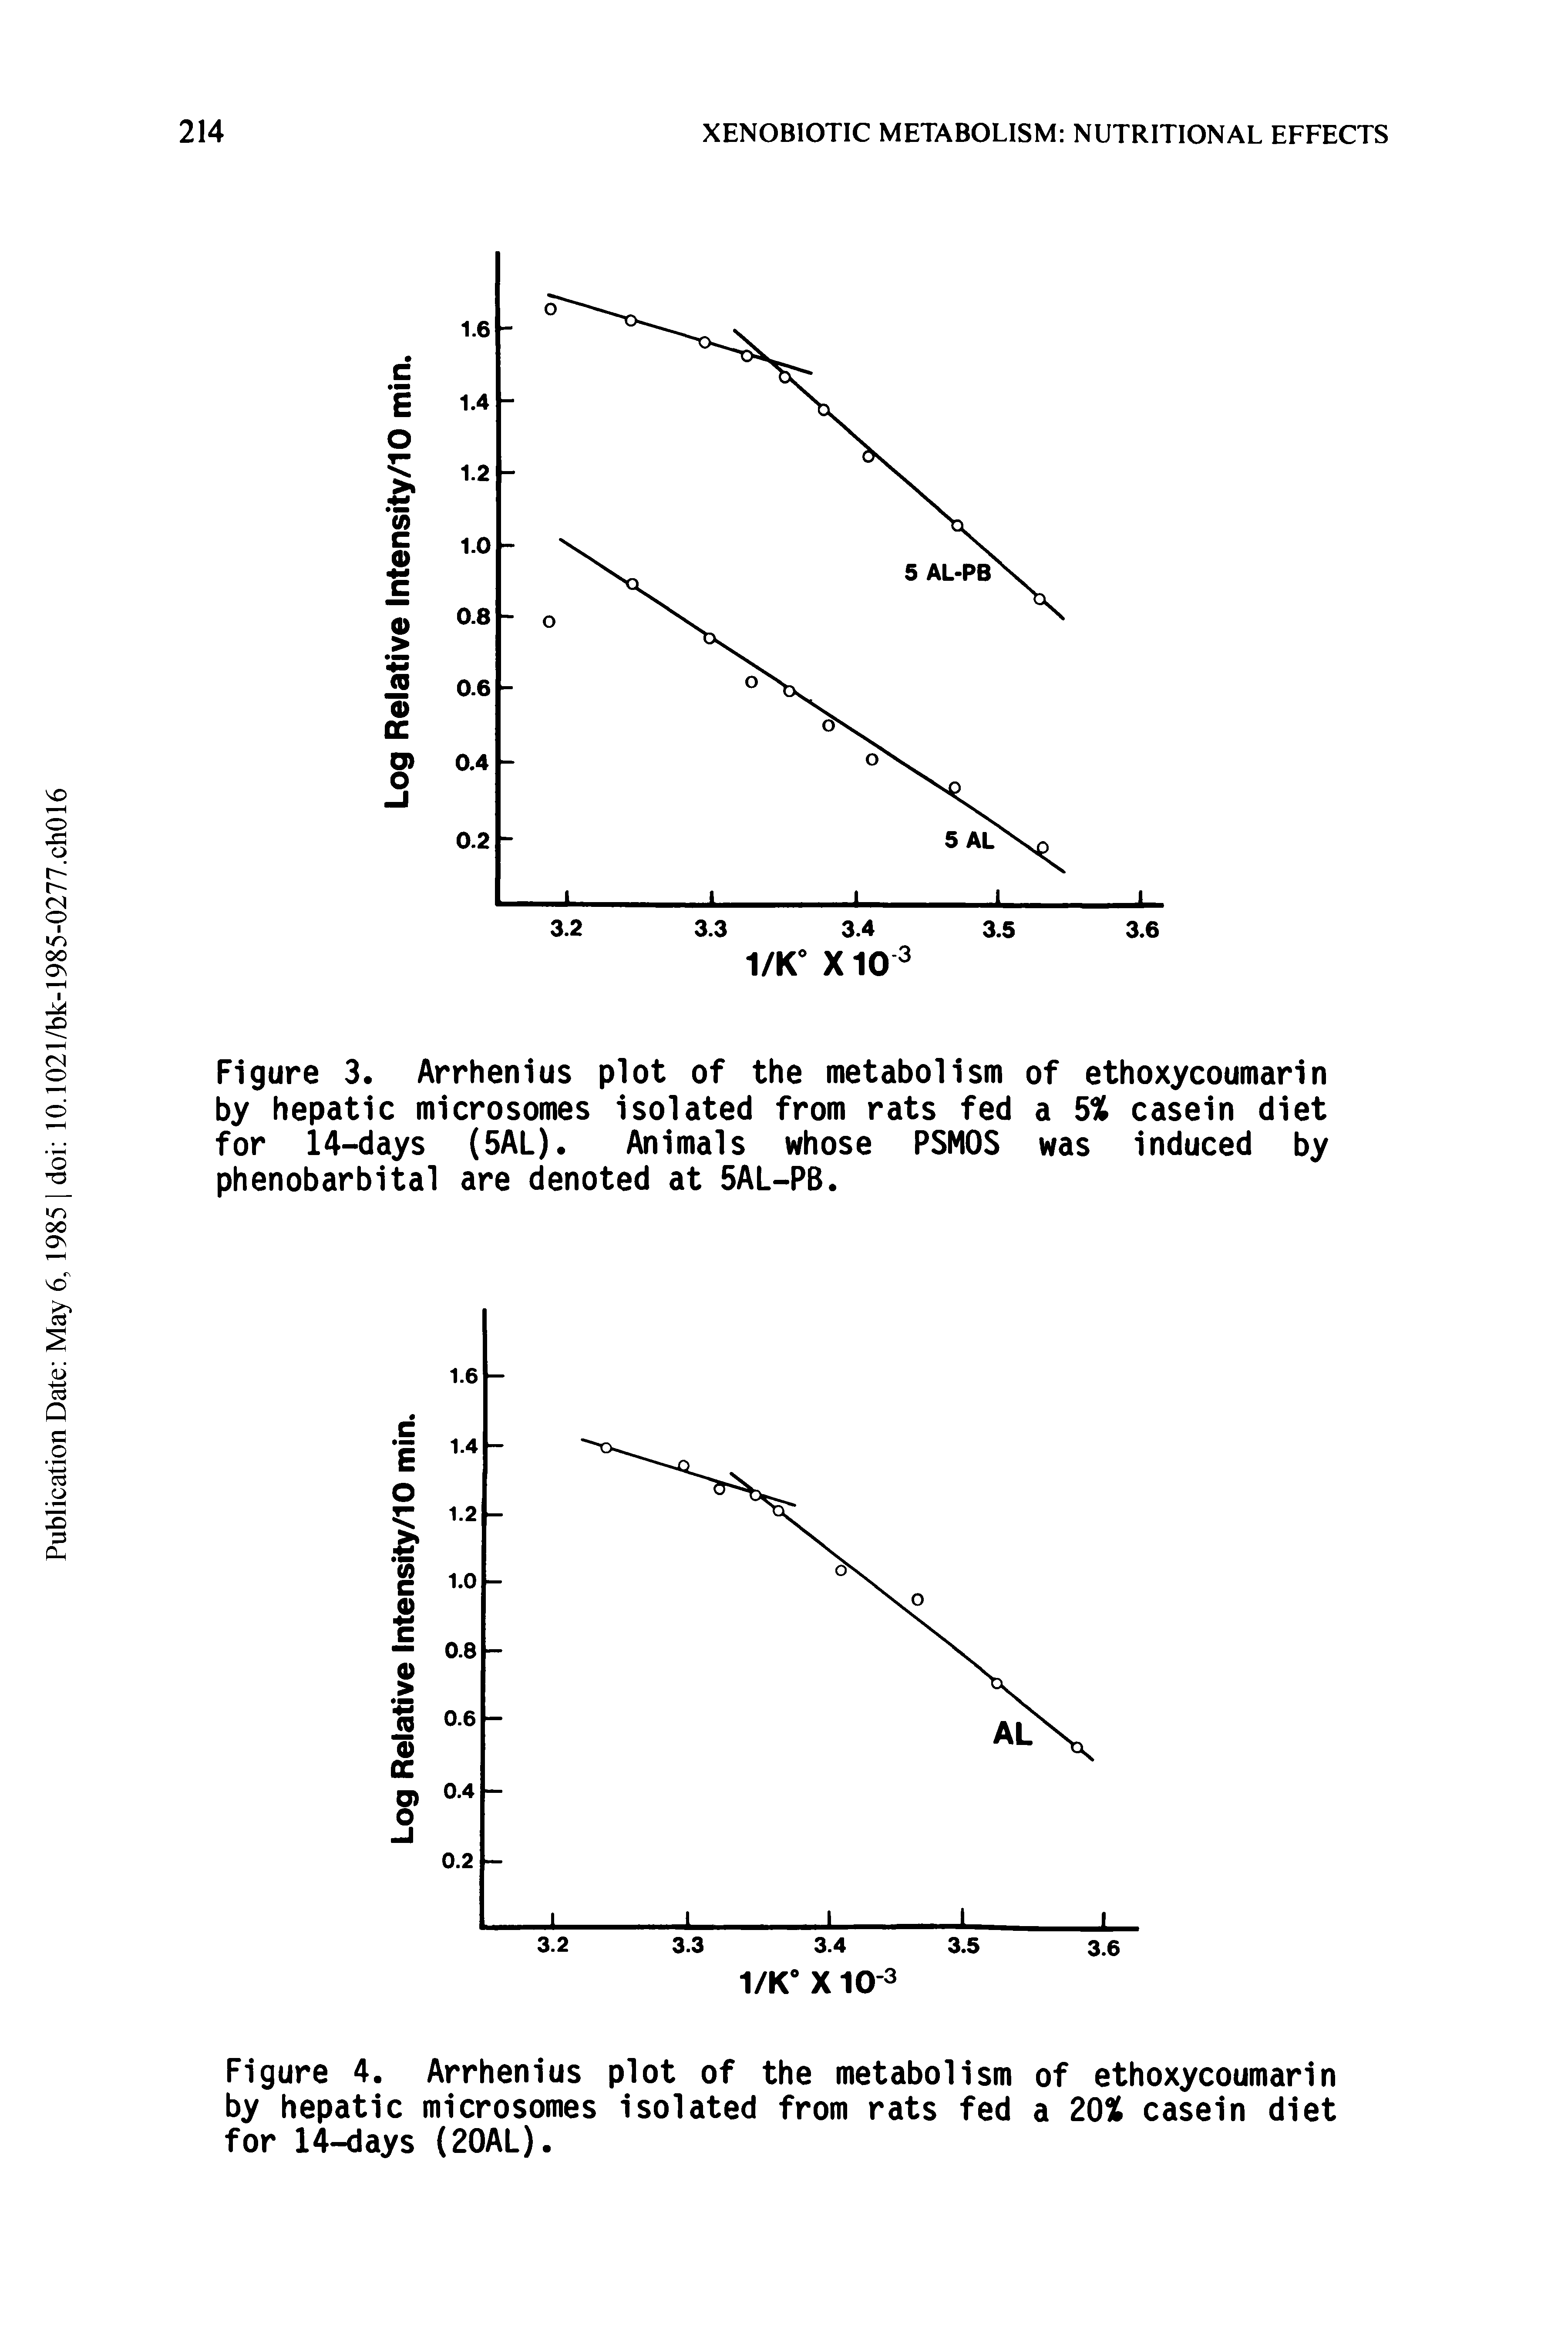 Figure 3. Arrhenius plot of the metabolism of ethoxycoumarin by hepatic microsomes isolated from rats fed a 5% casein diet for 14-days (5AL). Animals whose PSMOS was induced by phenobarbital are denoted at 5AL-PB.